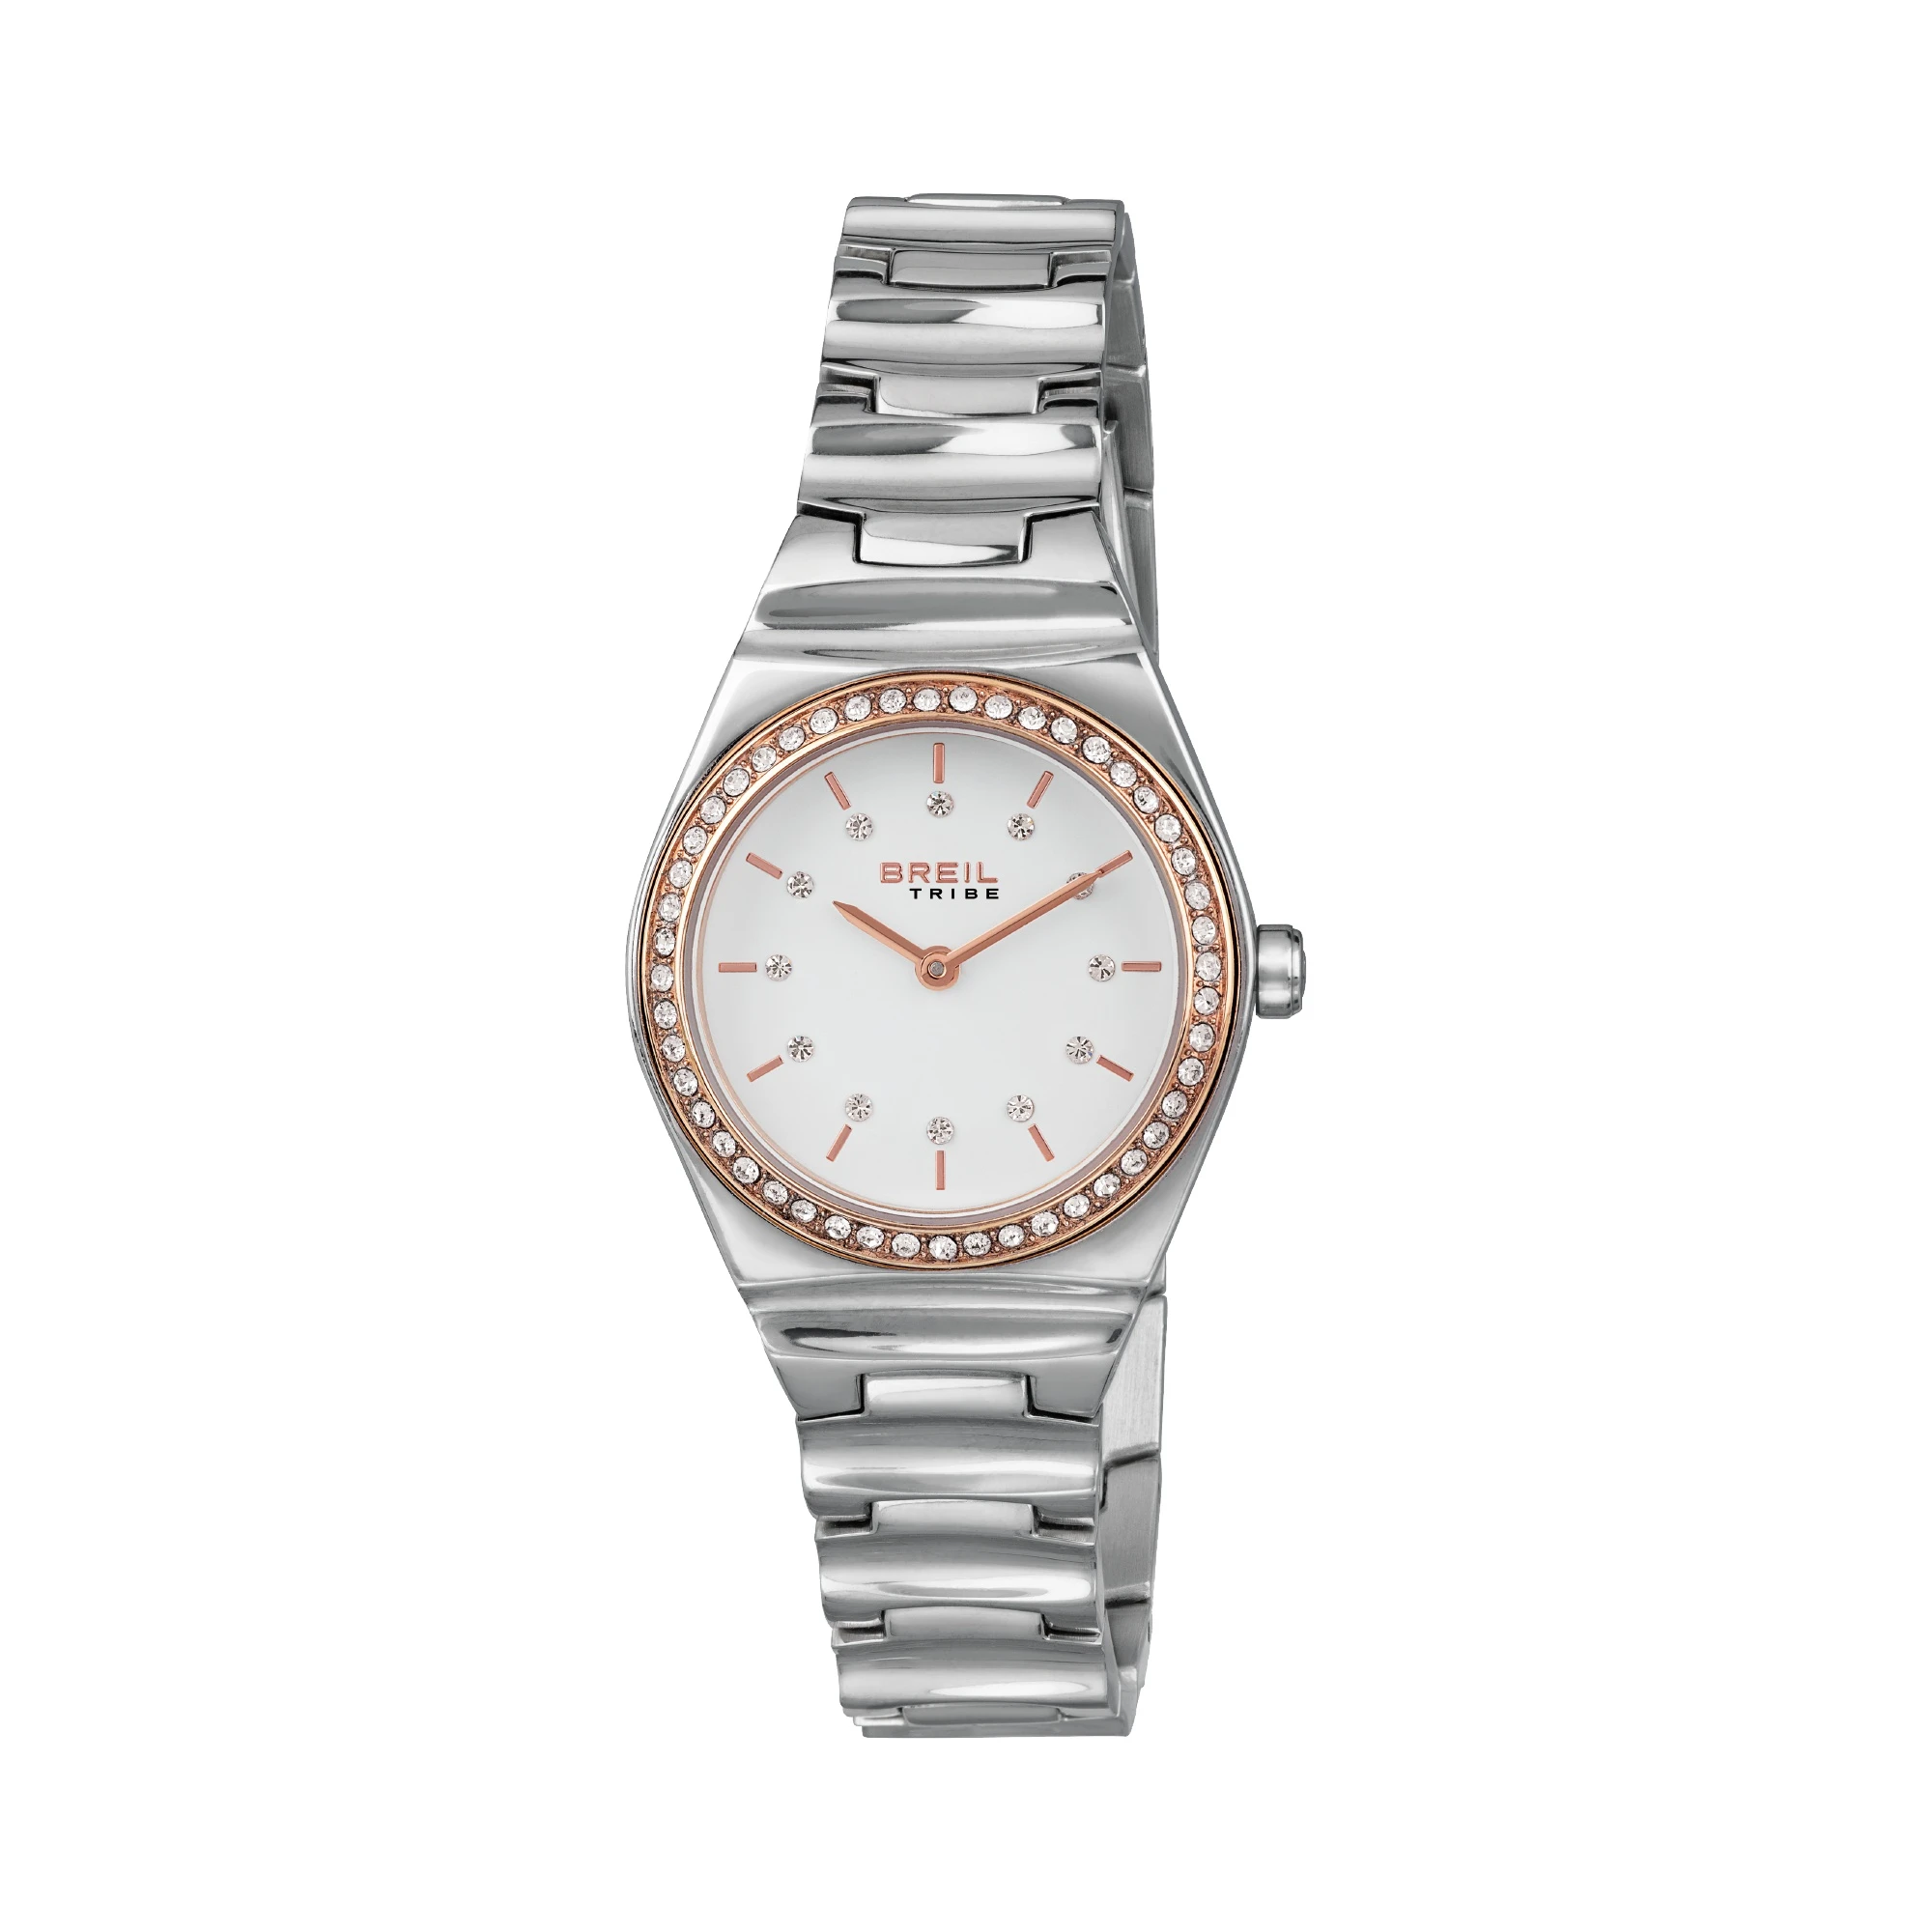 WAVES - LADY 30 MM TIME ONLY CLOCK - 1 - EW0454 | Breil